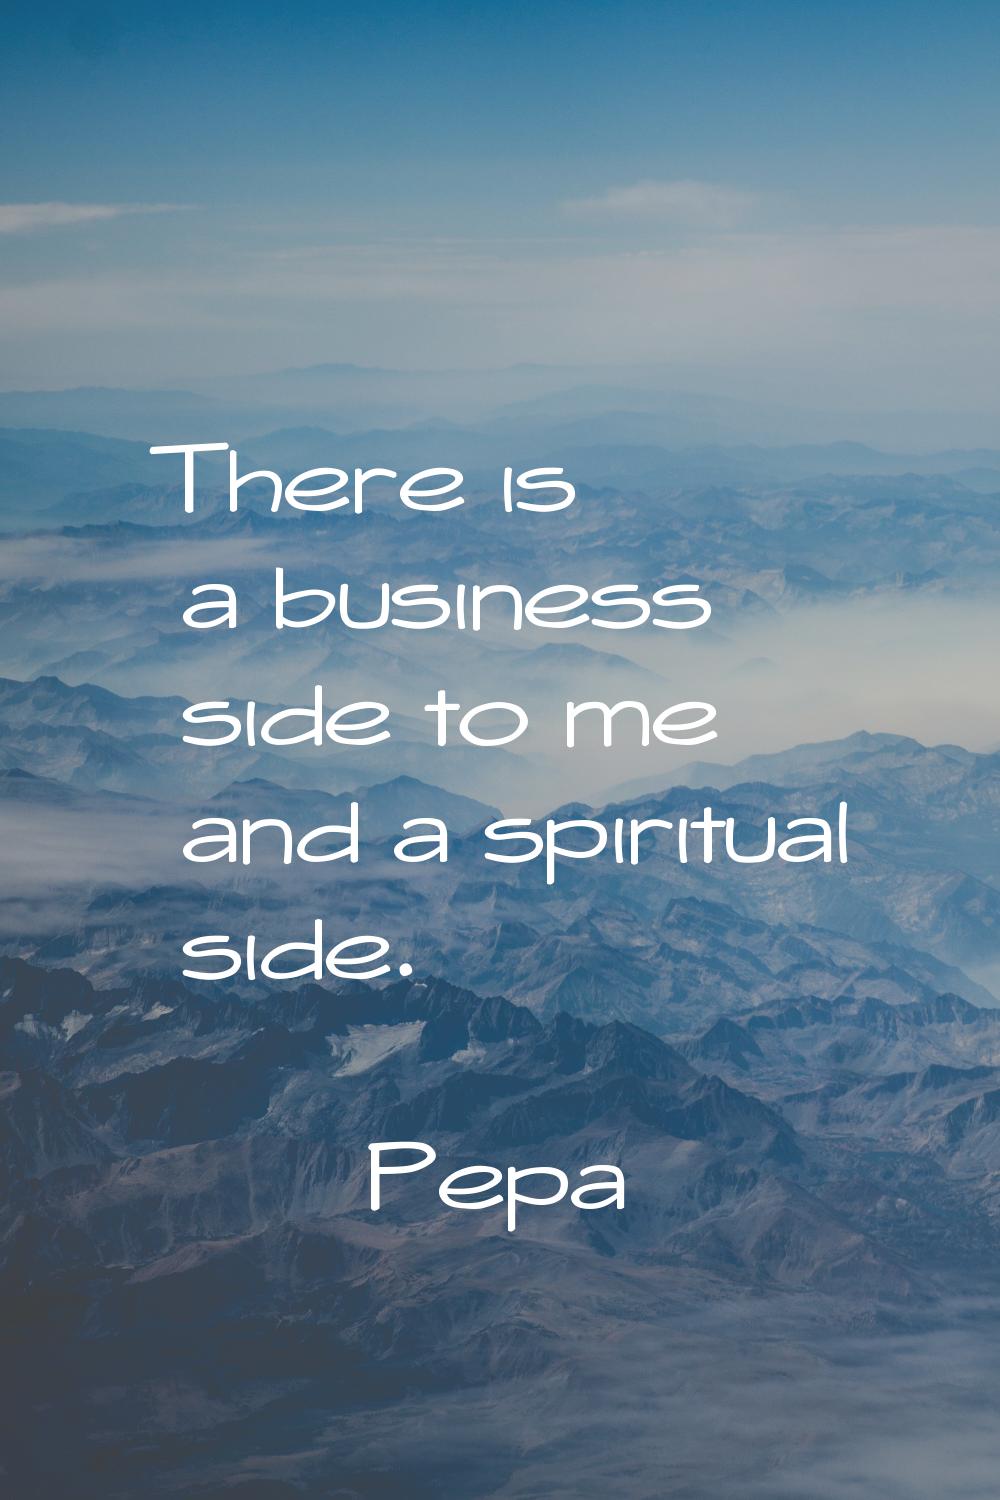 There is a business side to me and a spiritual side.